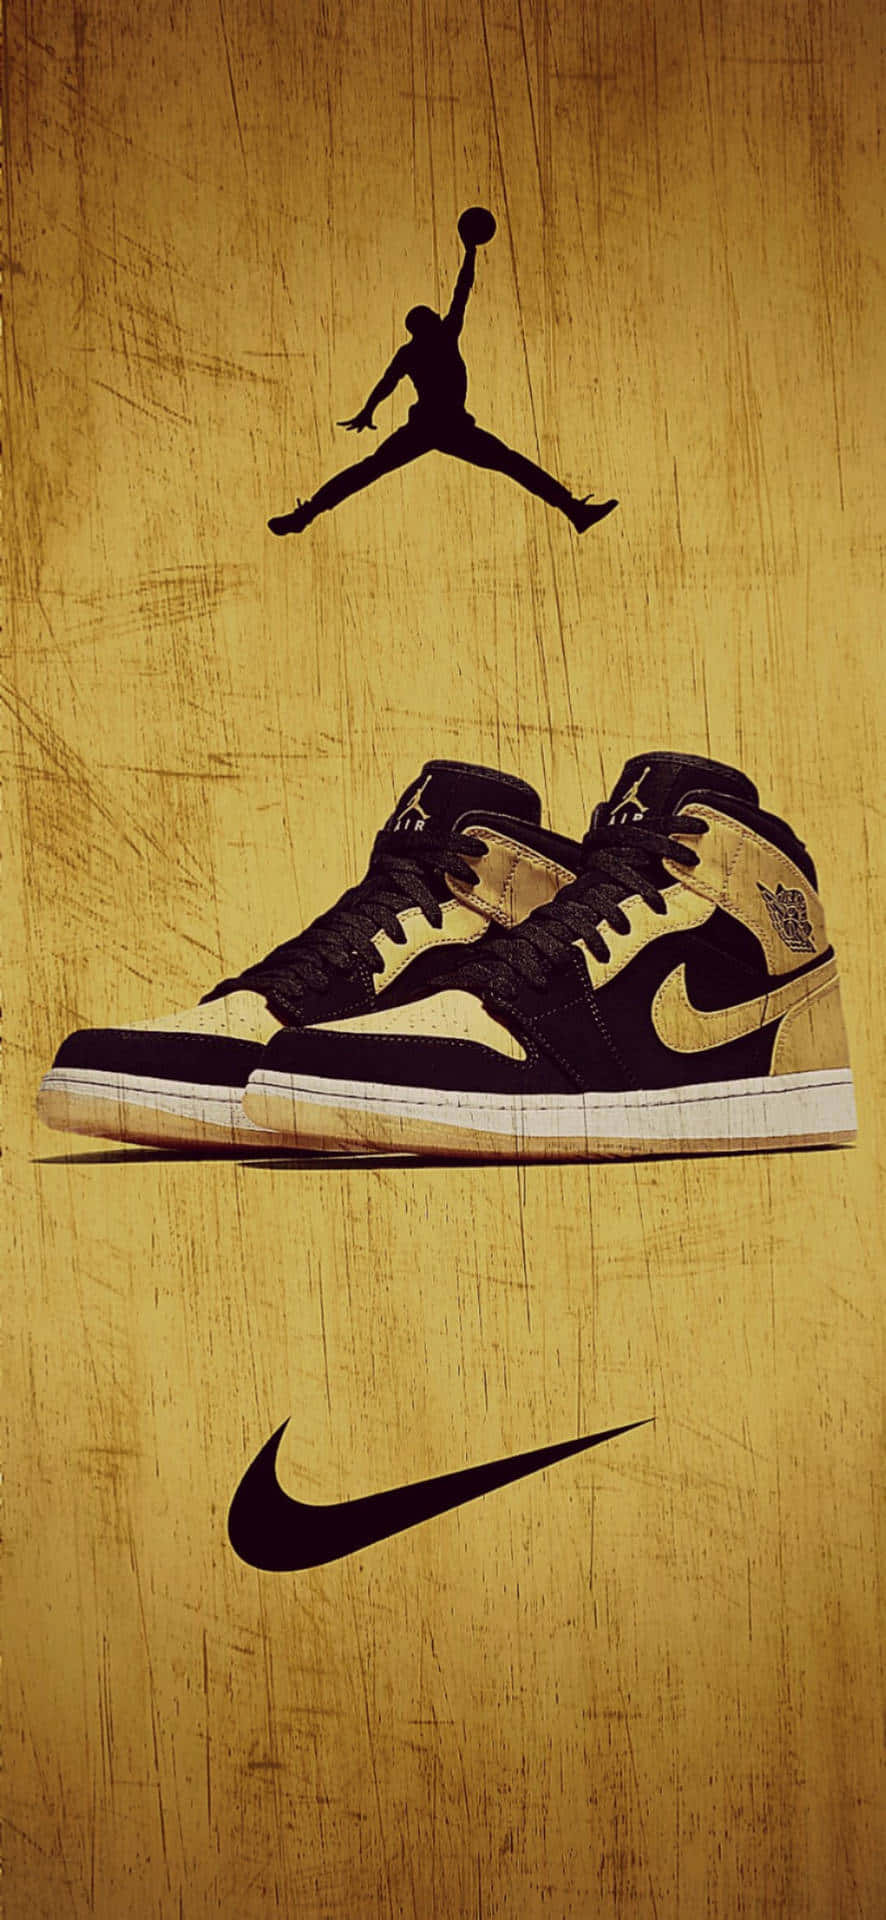 A Pair Of Gold And Black Jordan Shoes On A Brown Background Wallpaper